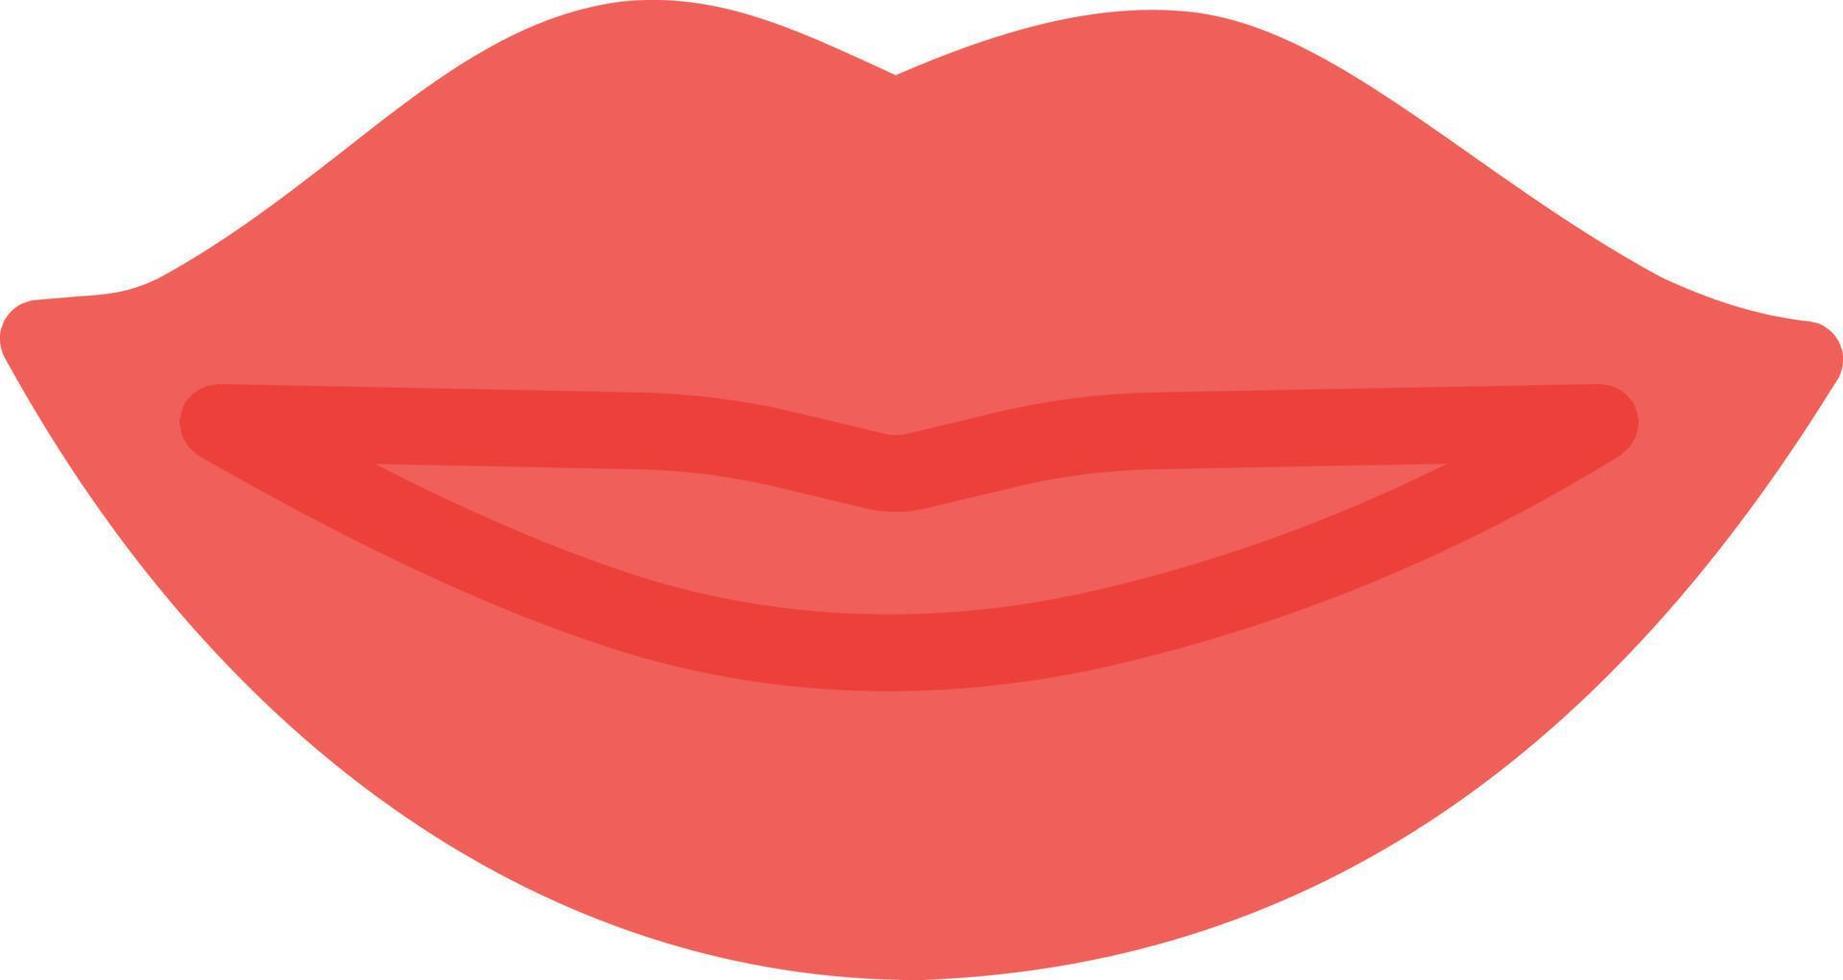 mouth vector illustration on a background.Premium quality symbols.vector icons for concept and graphic design.